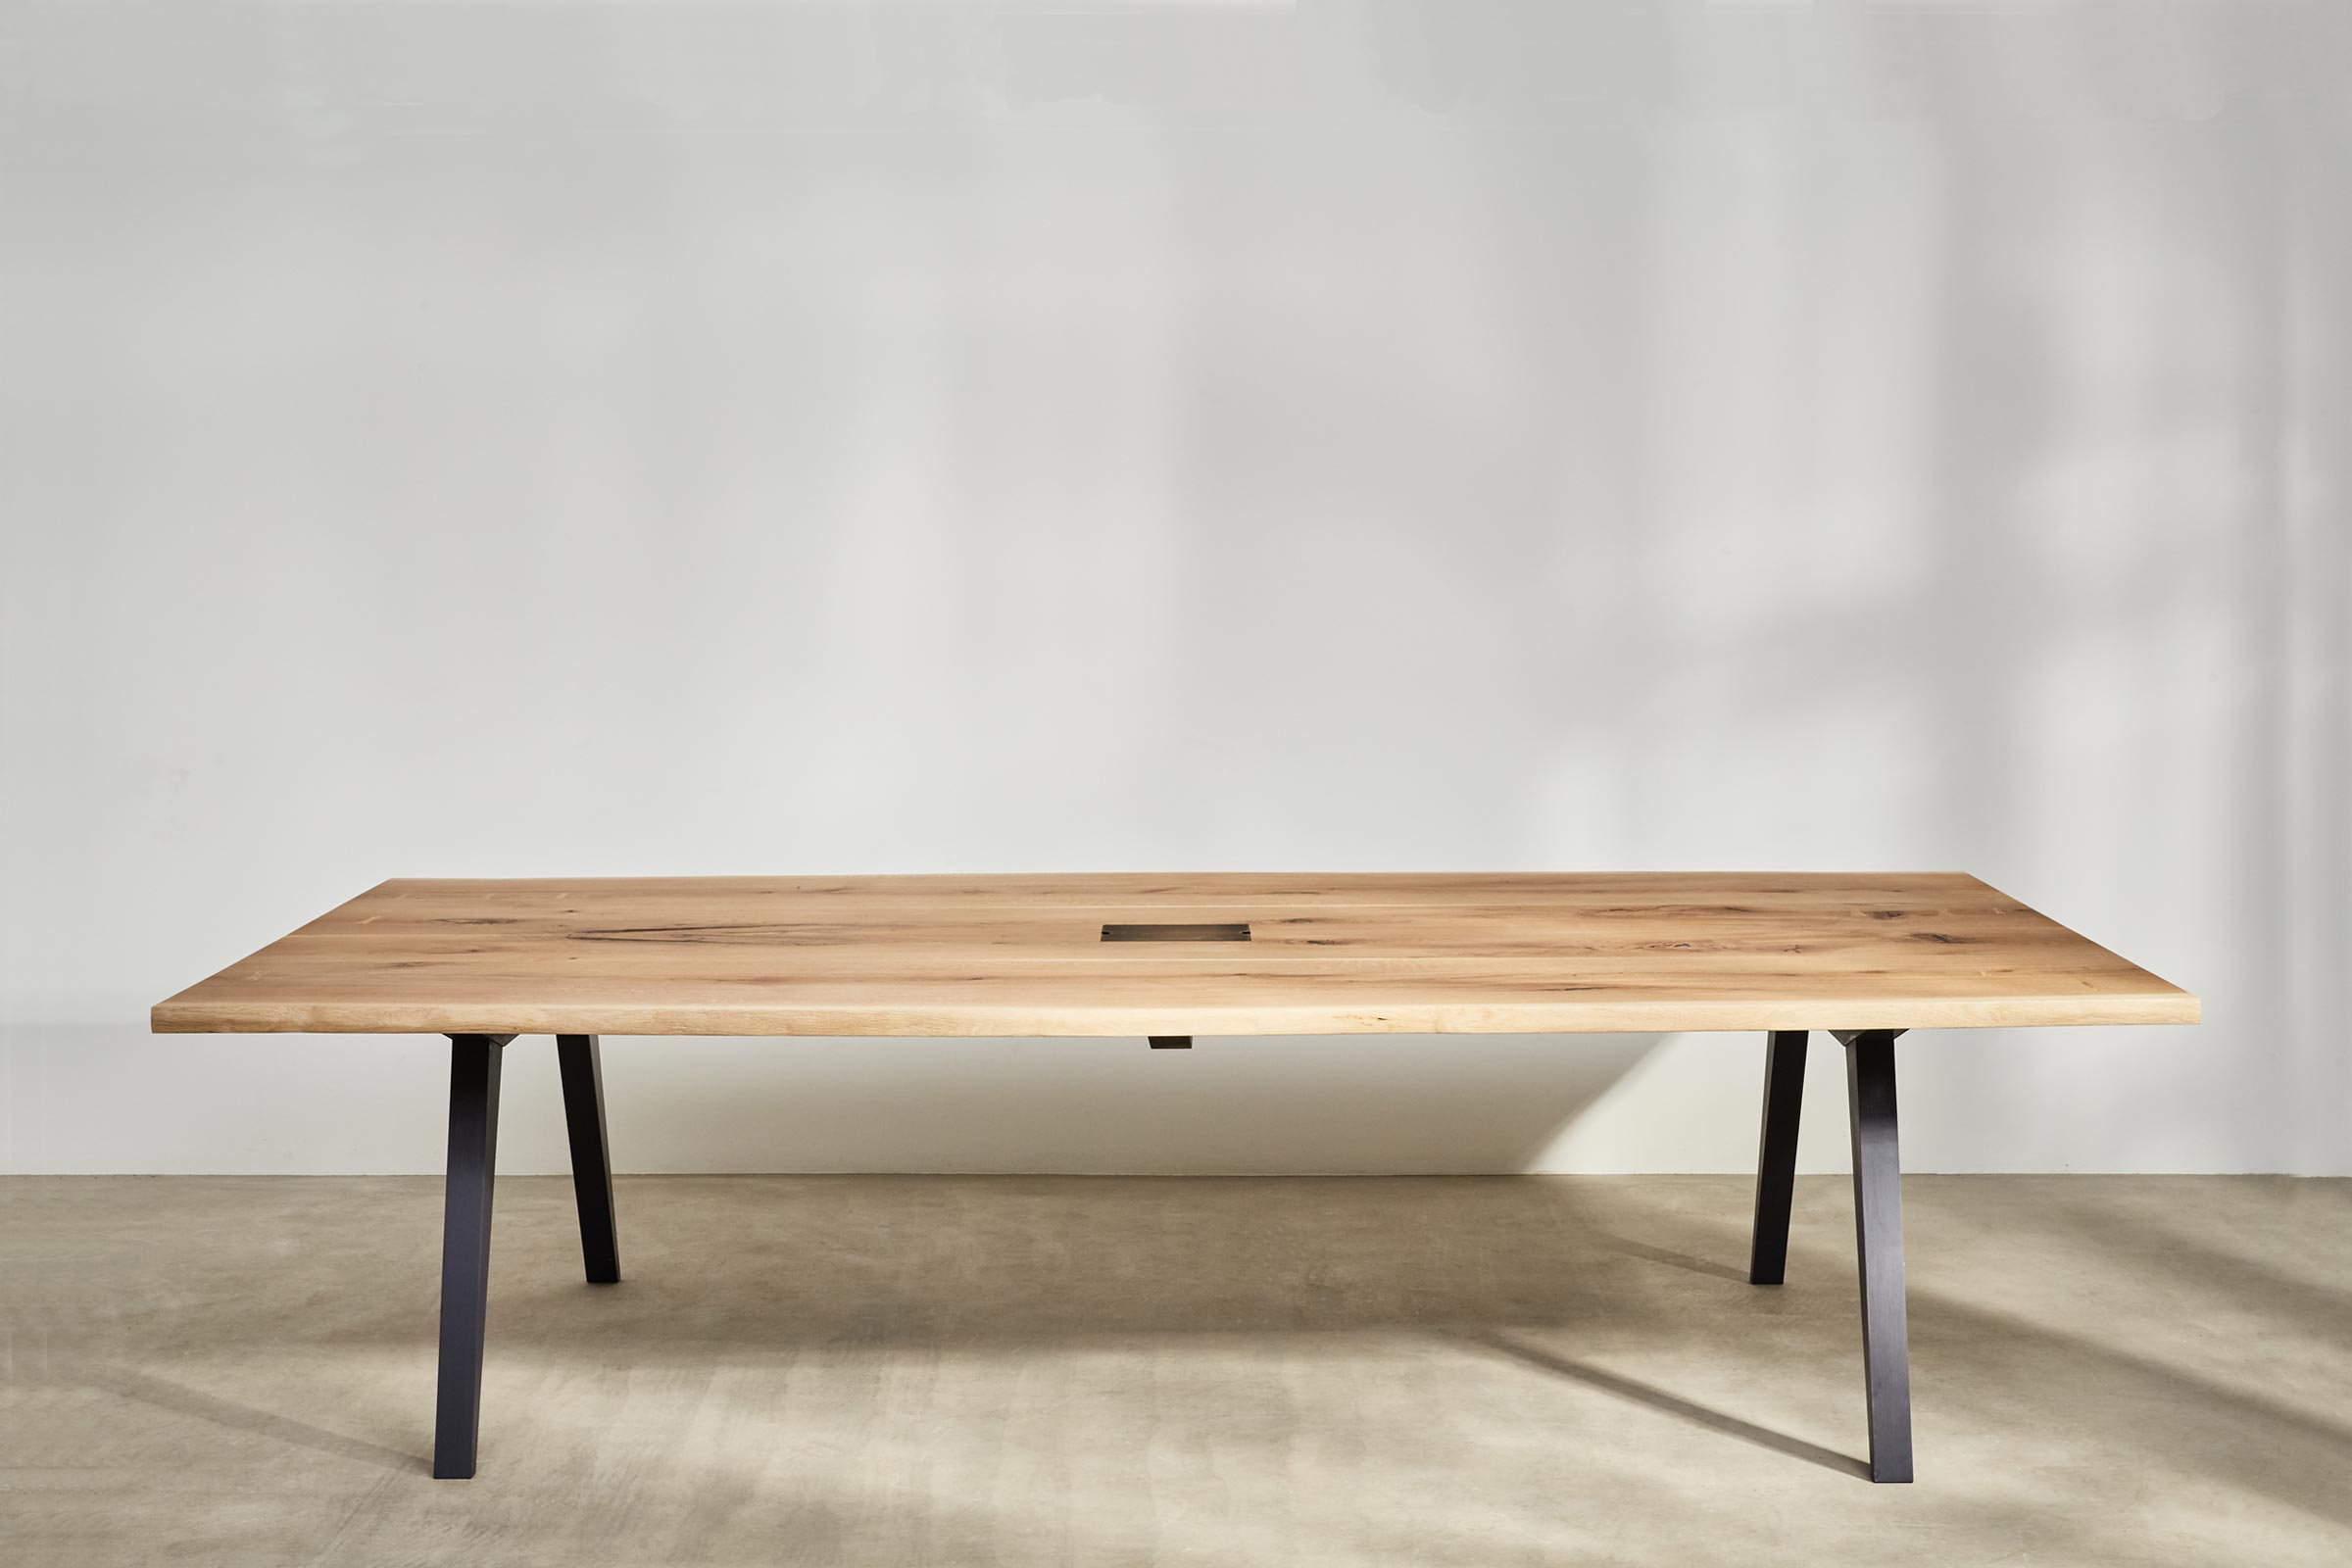 waney edge meeting table made from oak